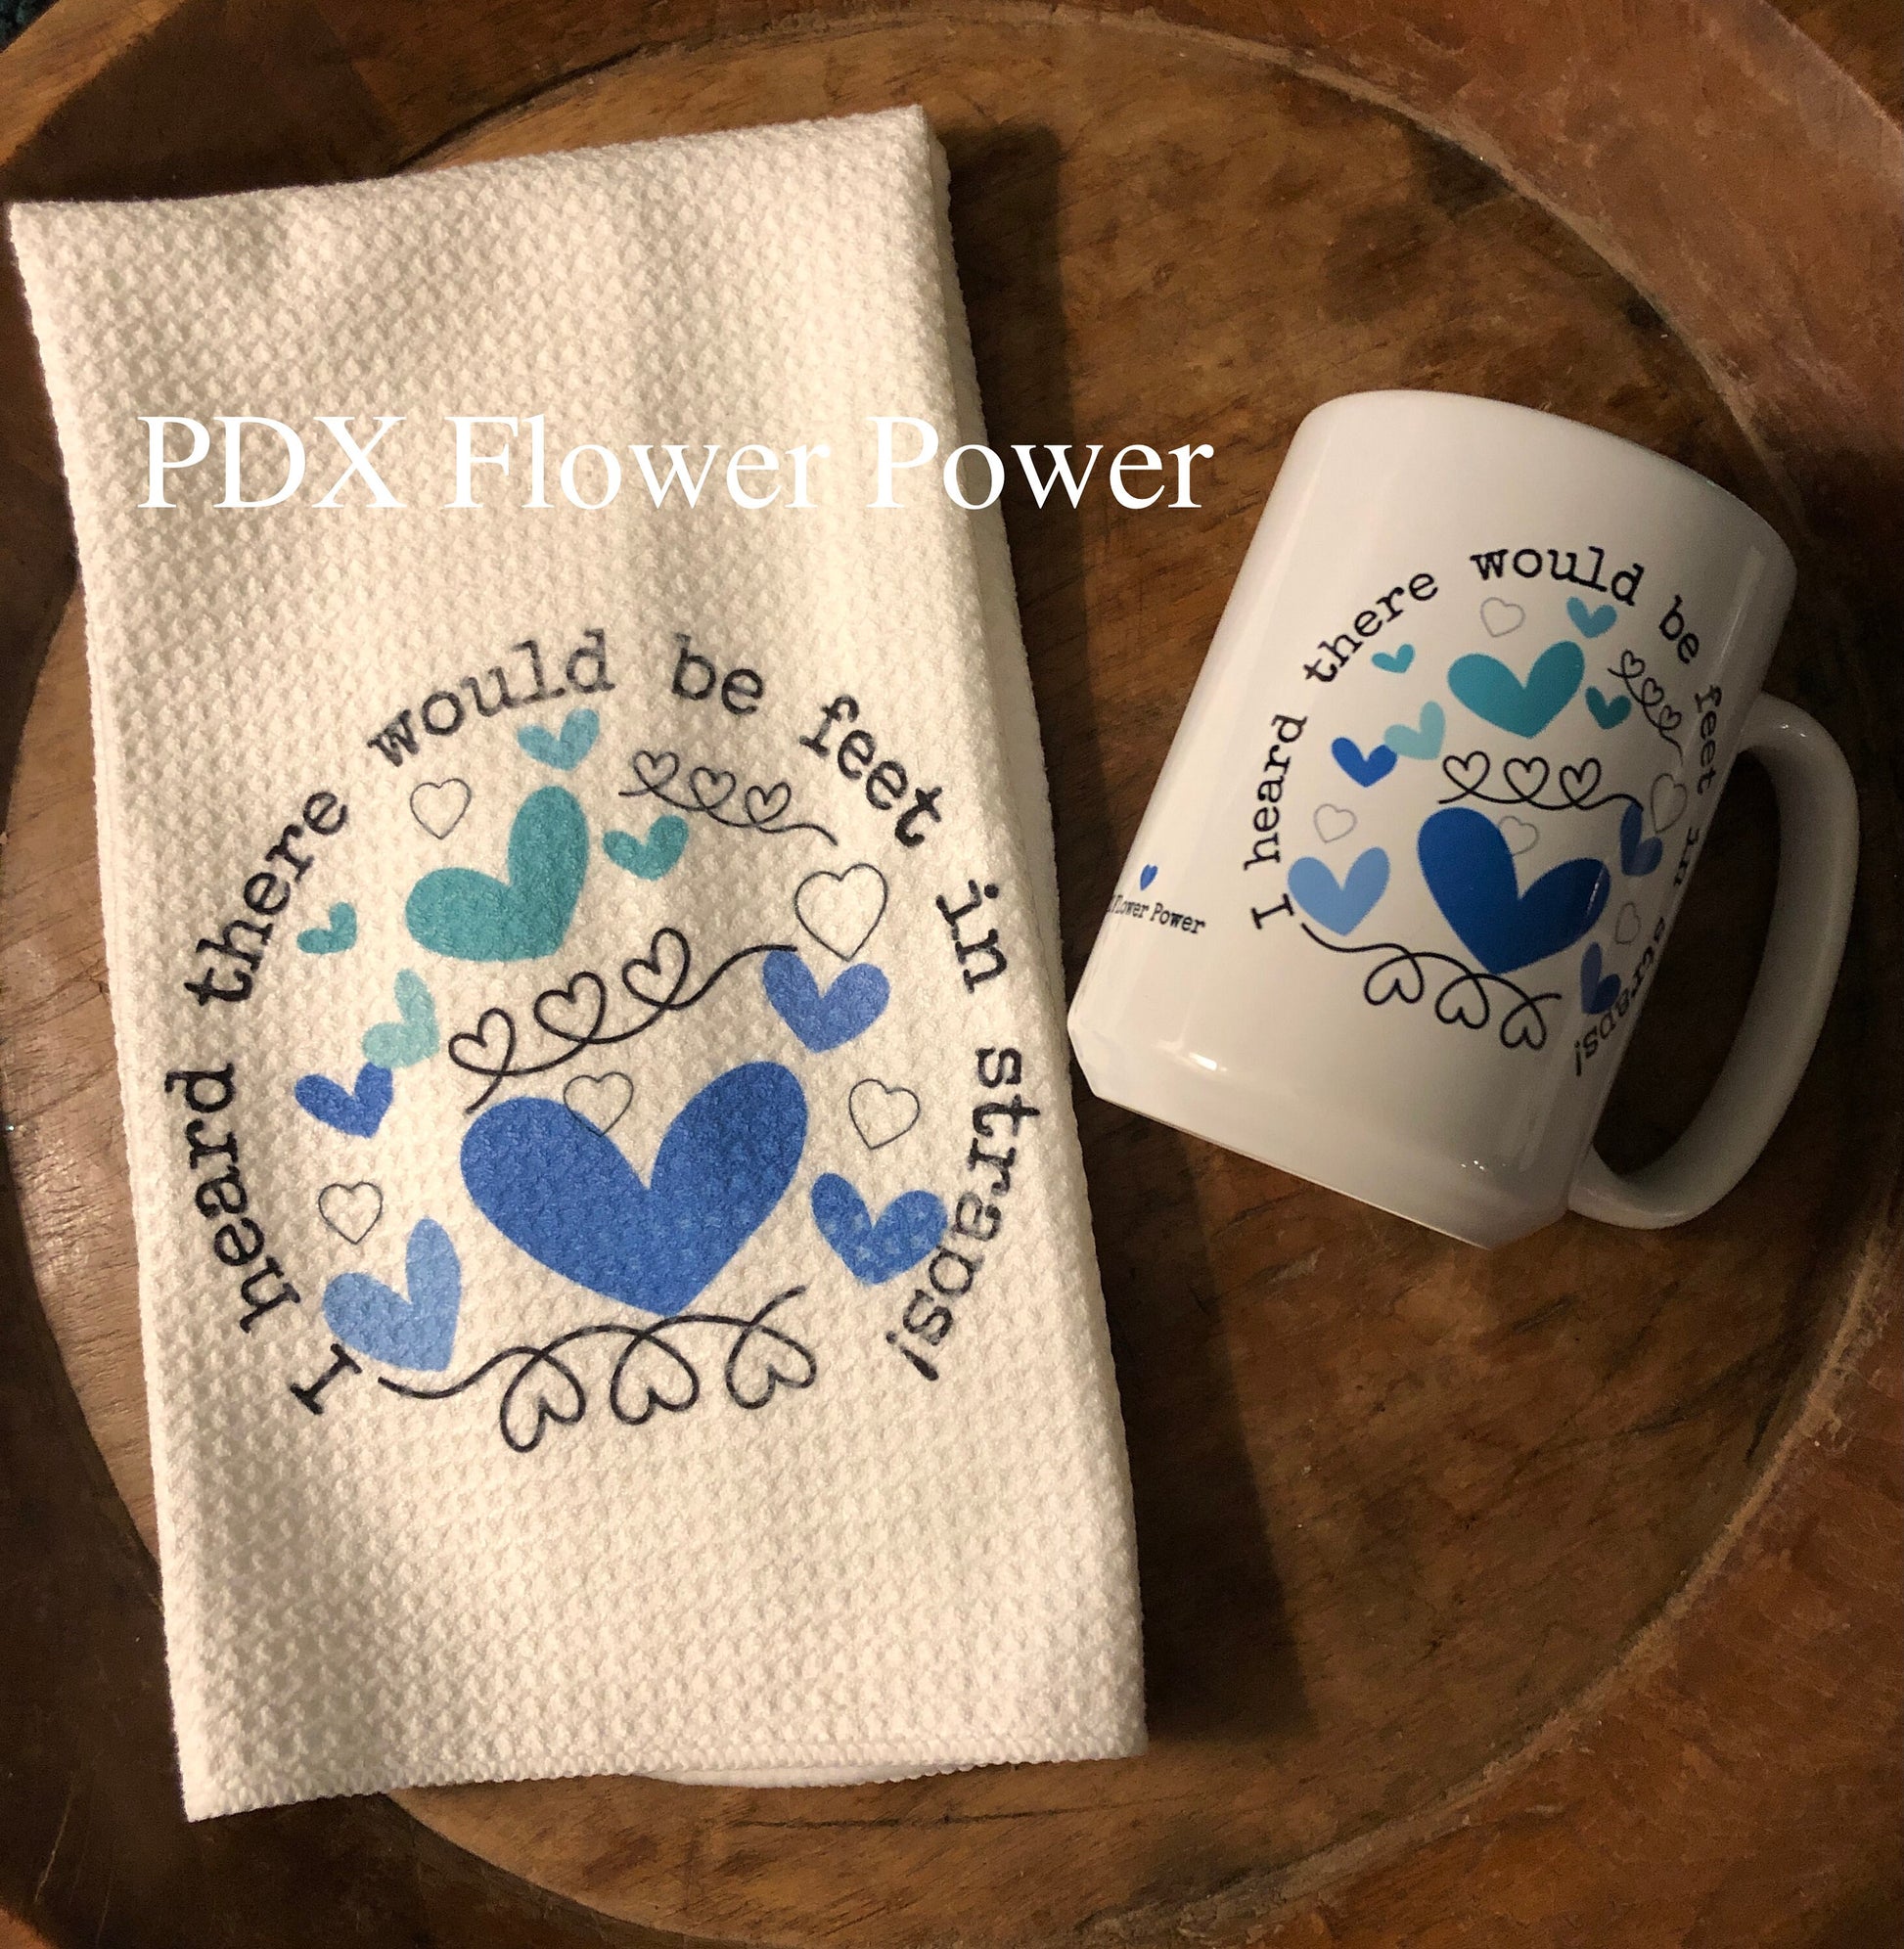 Pilates Gift Set I heard there would be feet in straps Mug and towel –  PDX Flower Power